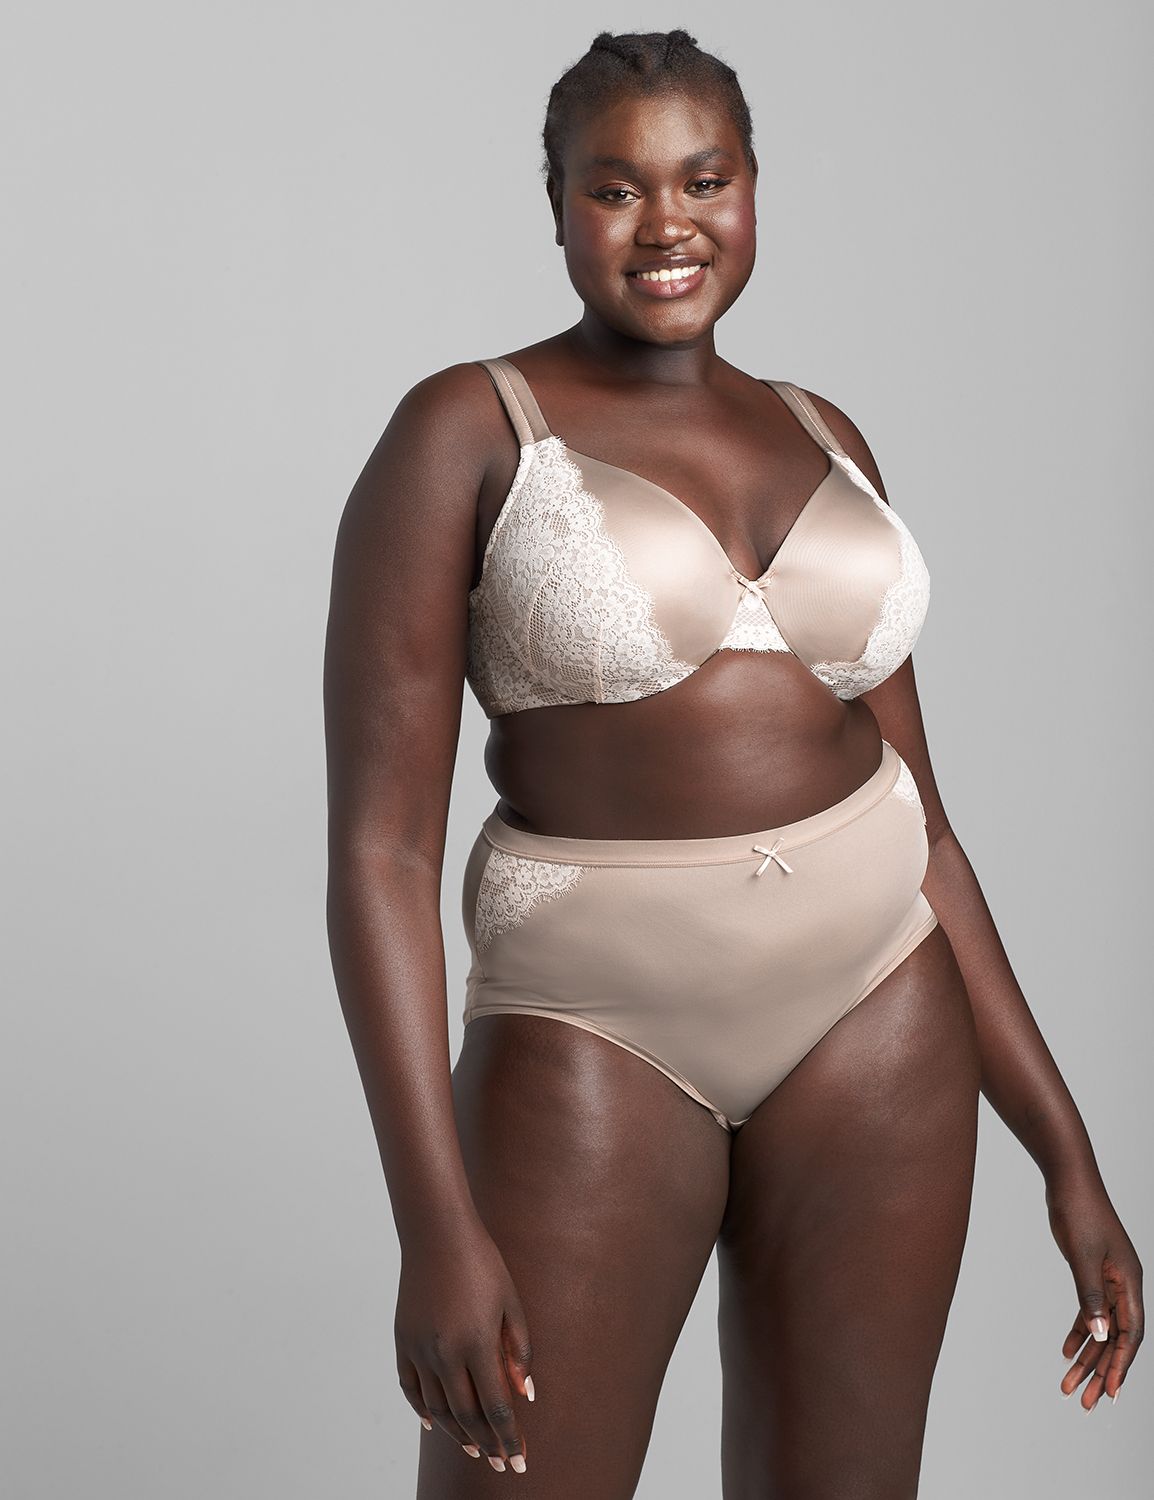 Lane Bryant Partners with True Fit for New Bra Finder Initiative: Cacique  Bra Finder powered by True Fit helps shoppers find bras that are true to you